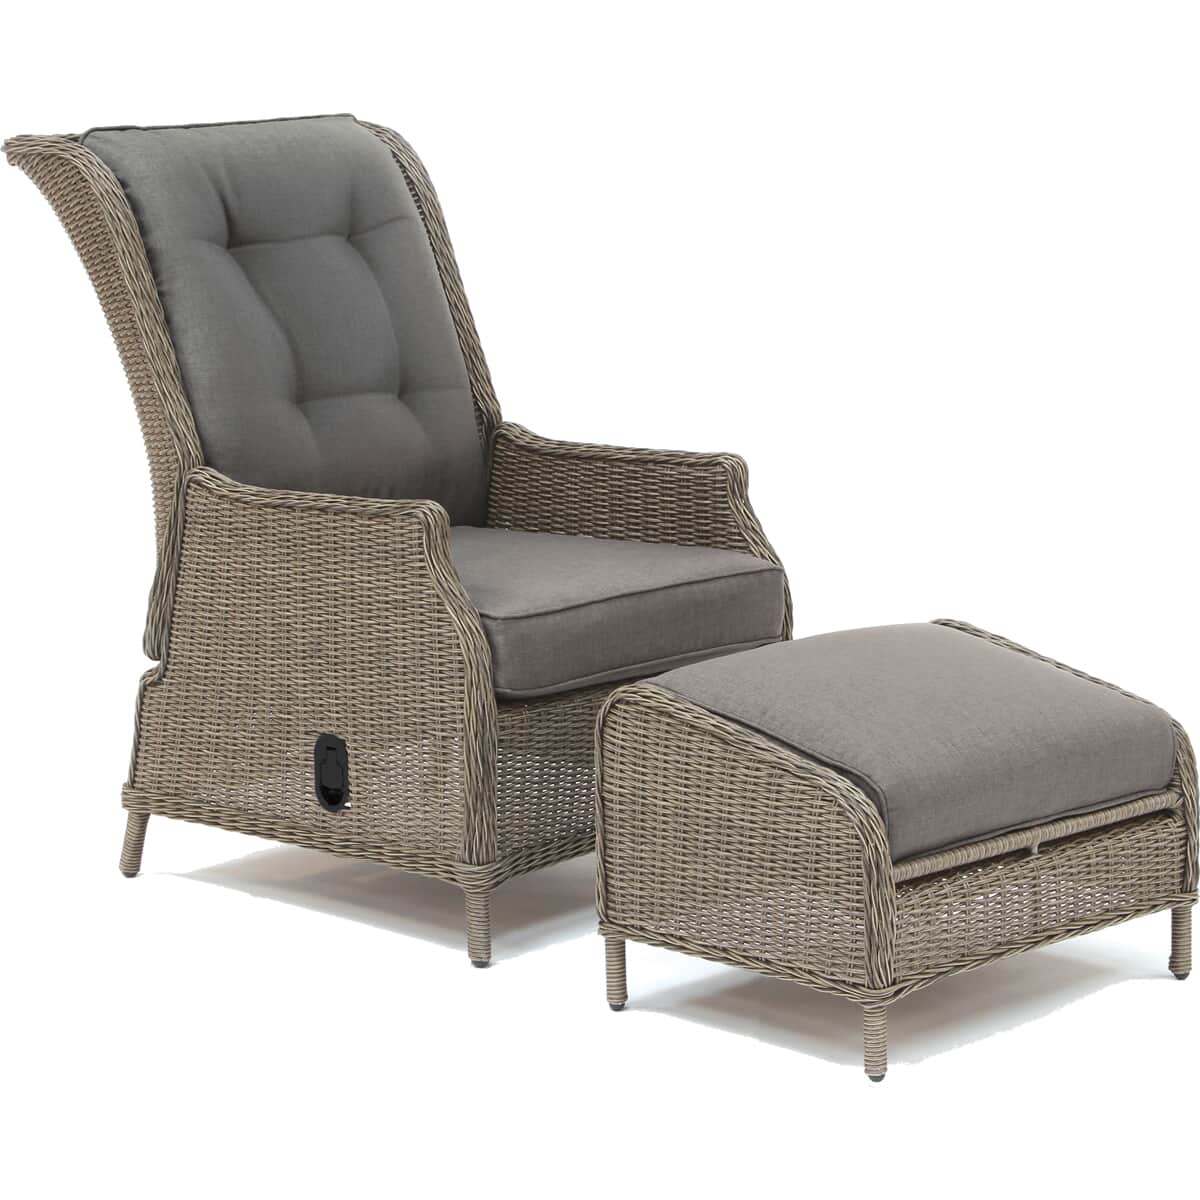 Kettler Classic Recliner And Footstool In Rattan With ...